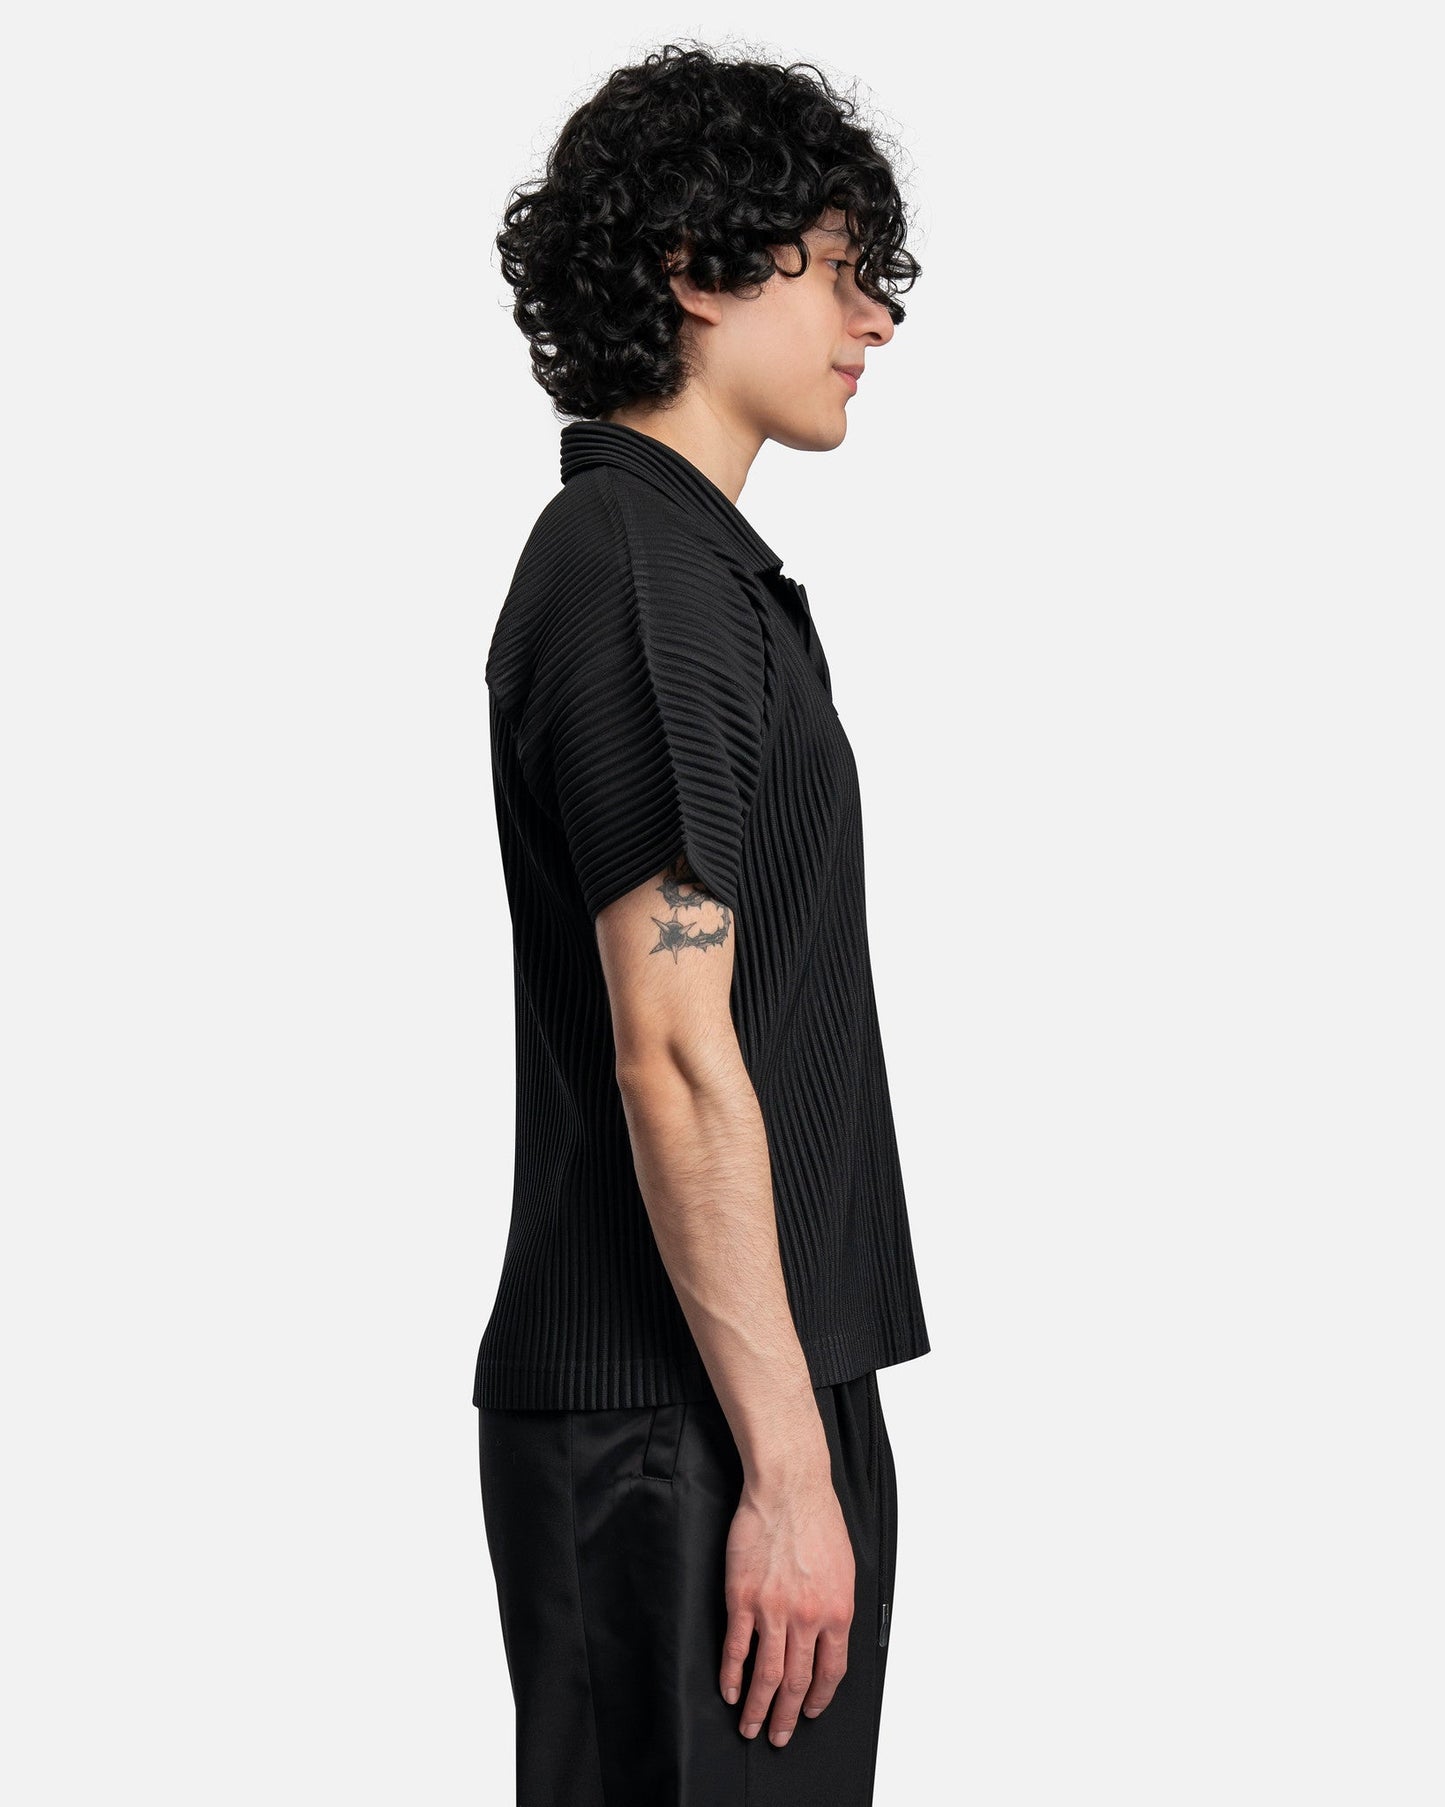 Homme Plissé Issey Miyake Men's Tops Monthly Colors Polo in Black